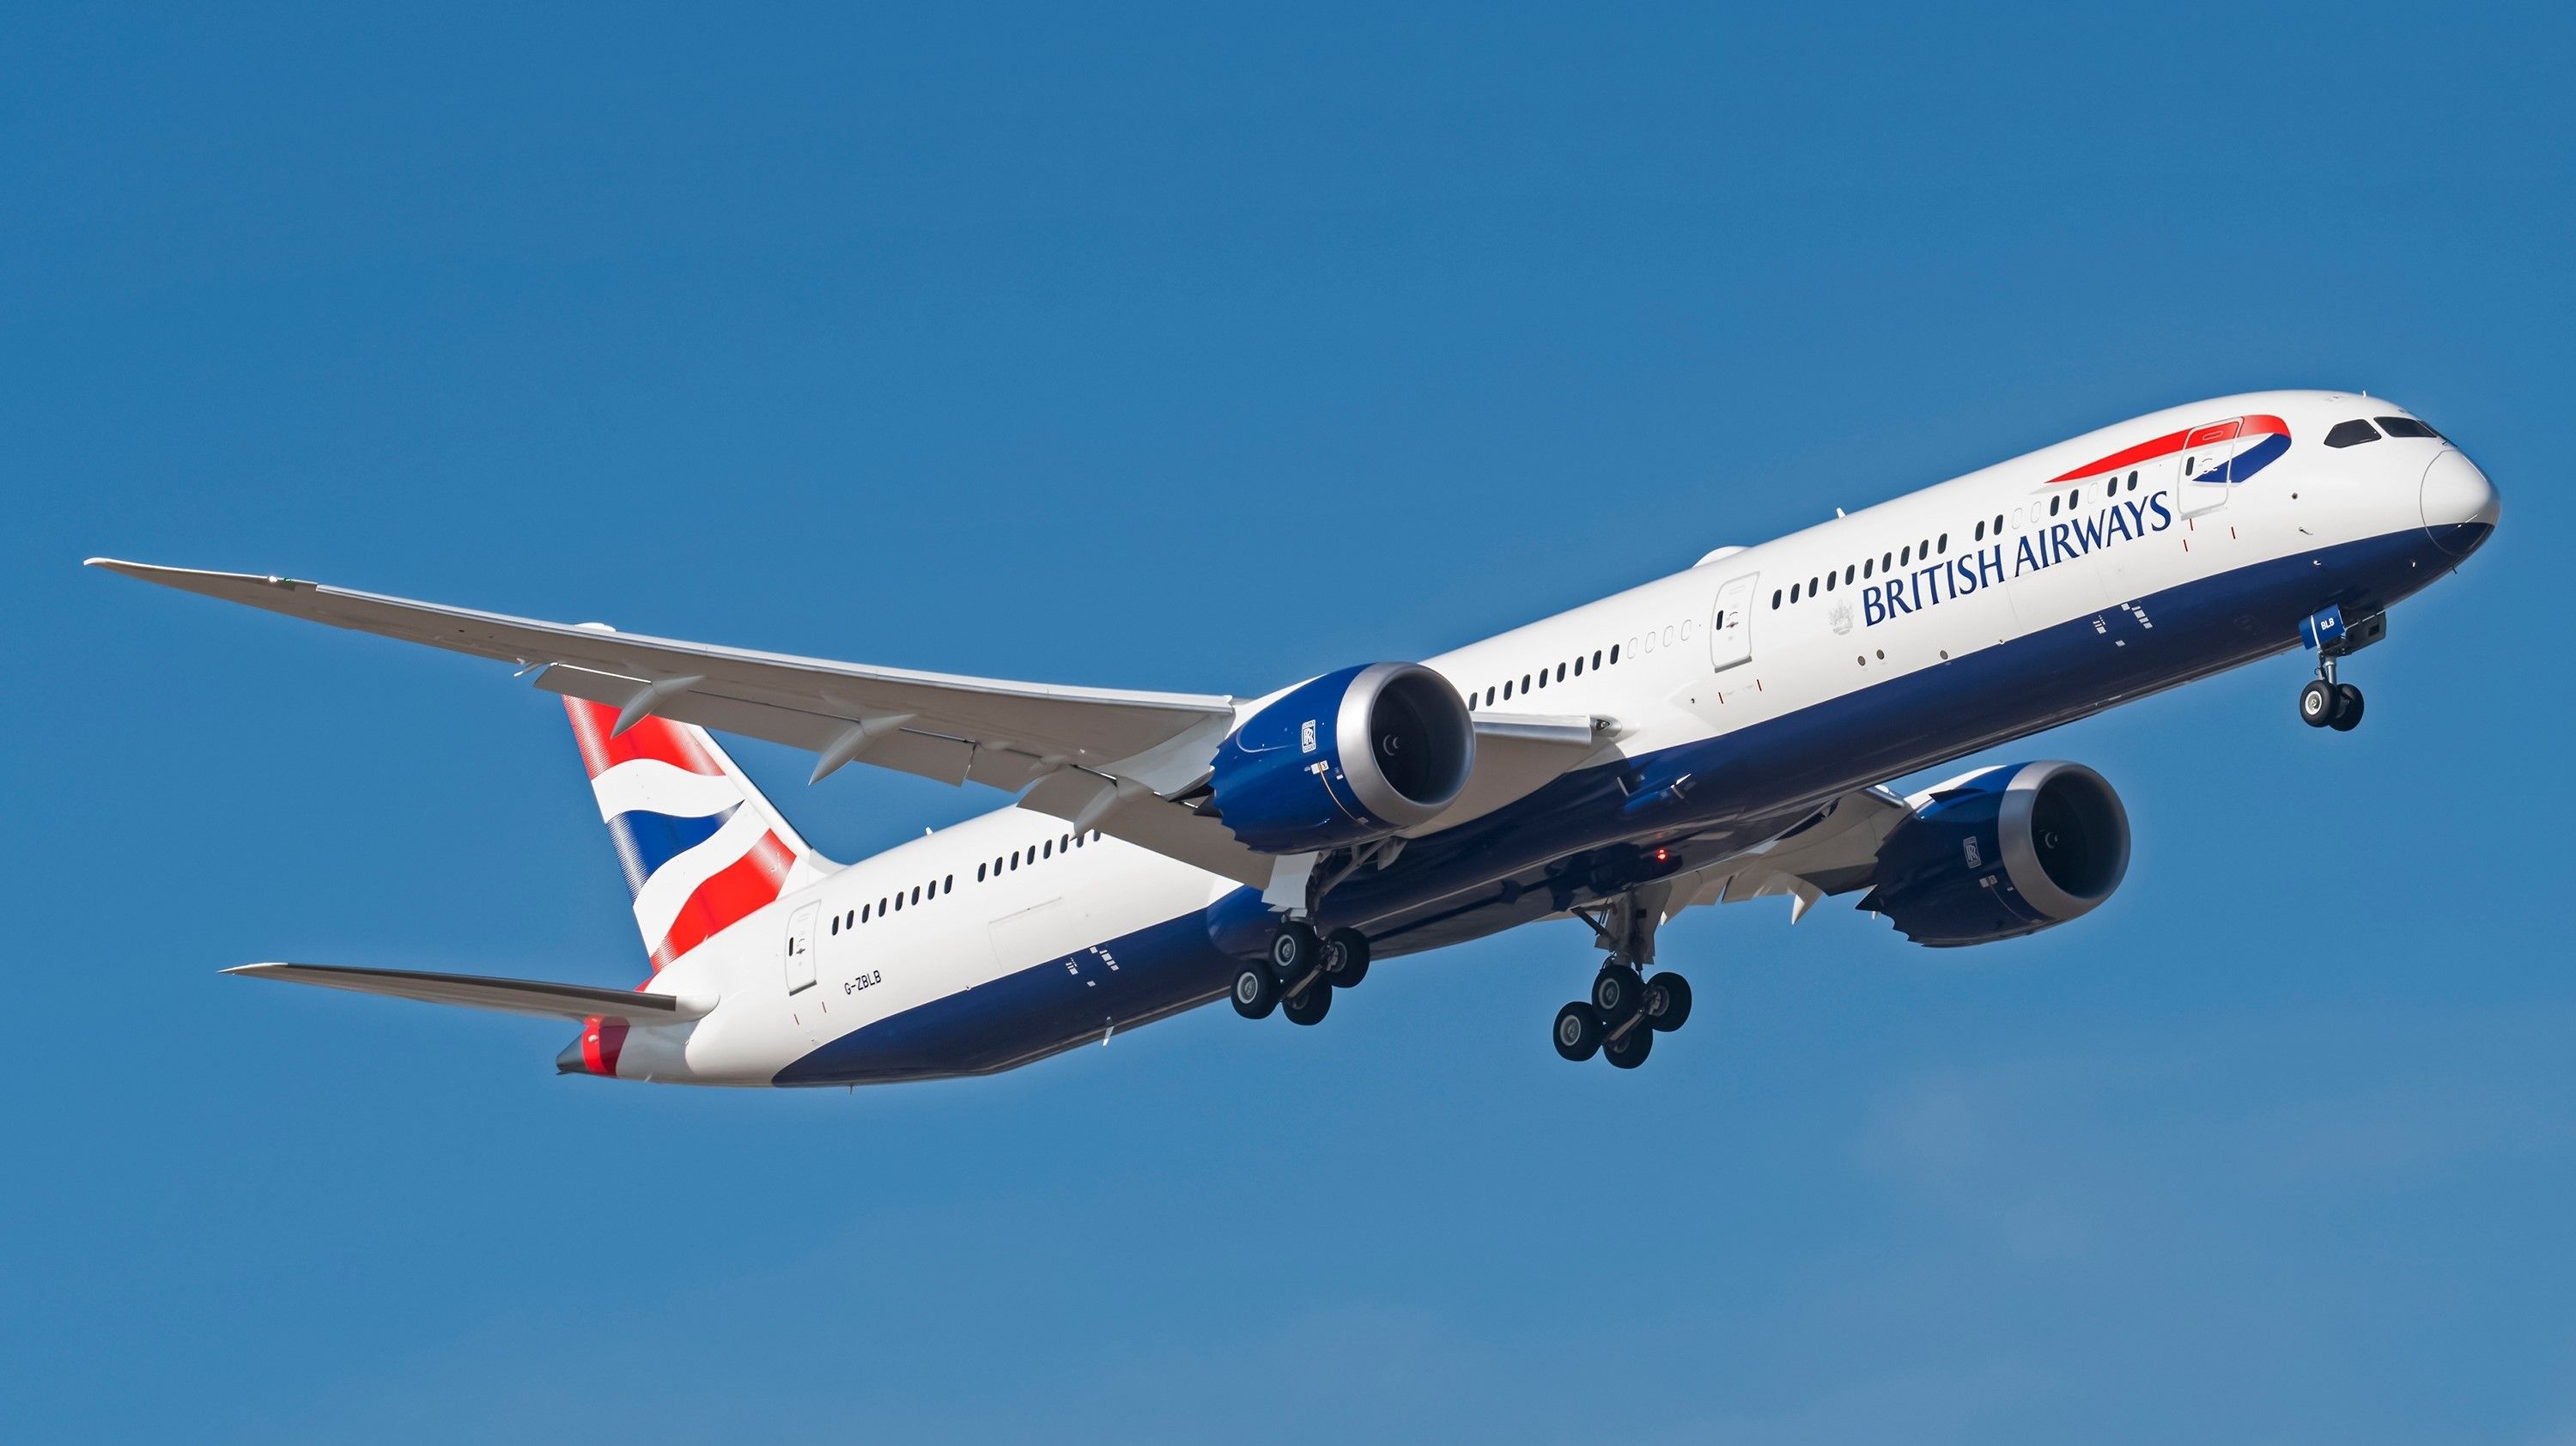 A British Airways Boeing 787-10 flying in the sky.